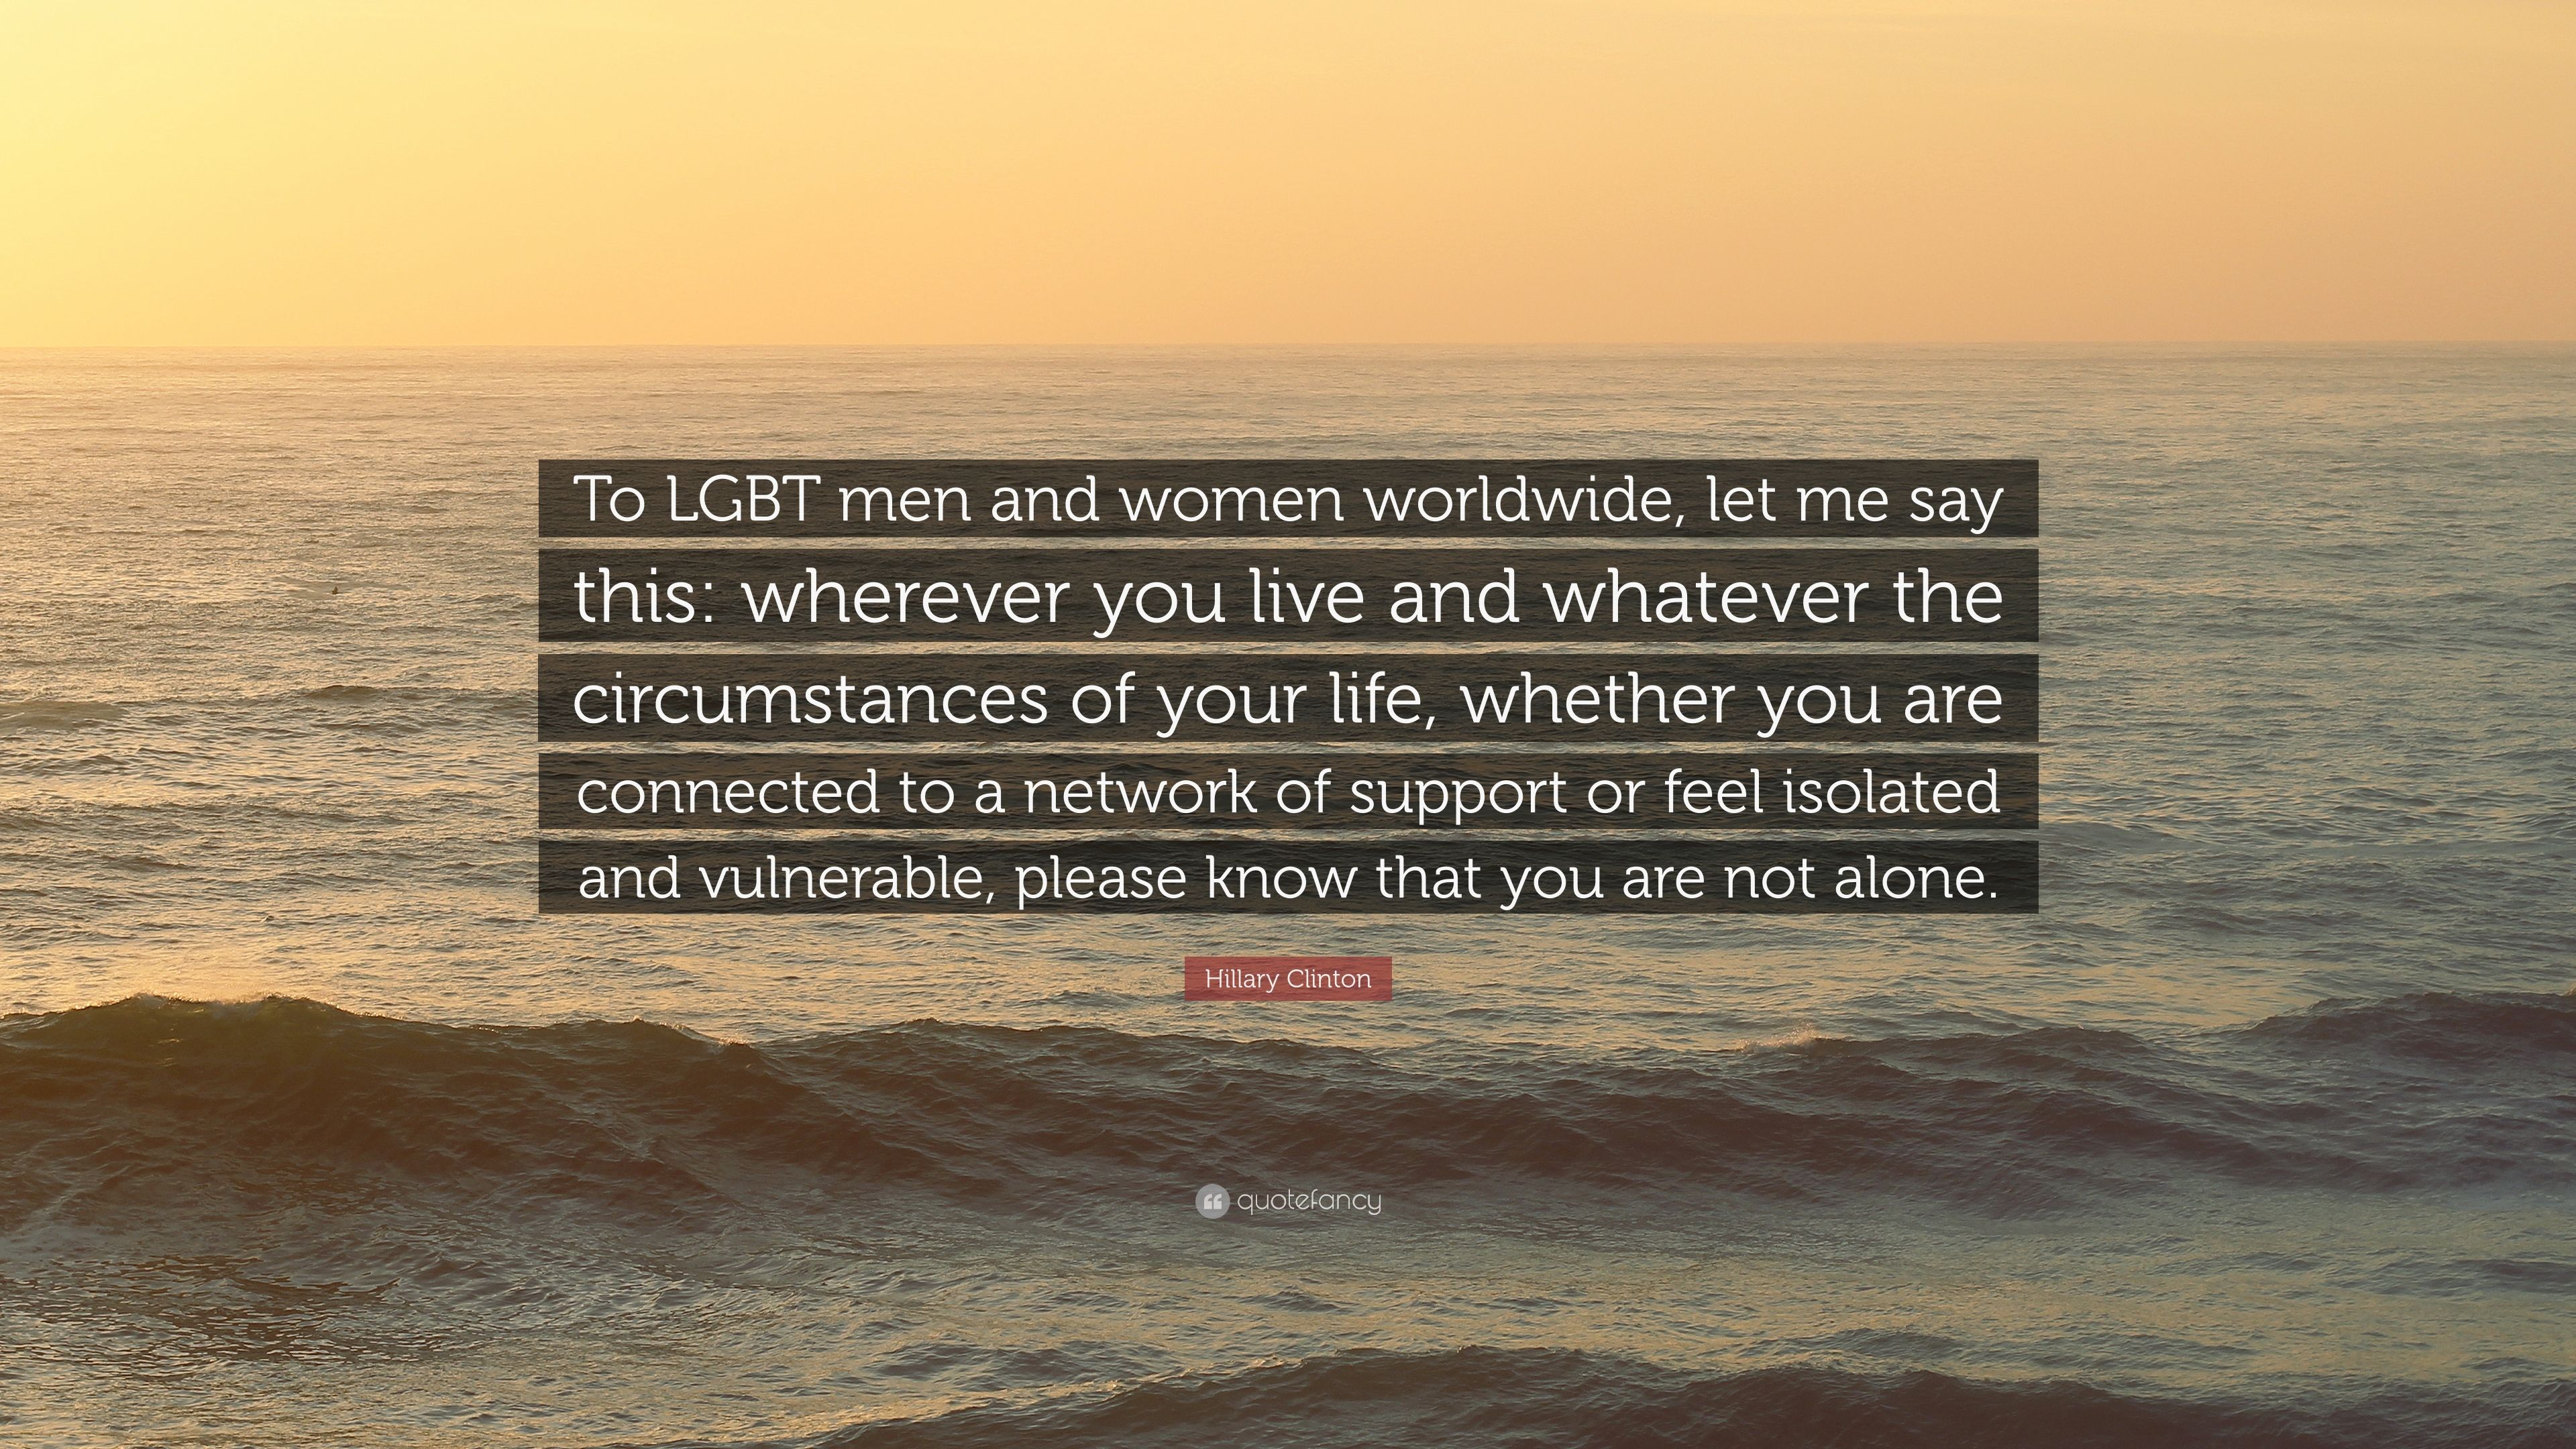 Hillary Clinton Quote: “To LGBT men and women worldwide, let me say this: wherever you live and whatever the circumstances of your life, whether.” (12 wallpaper)